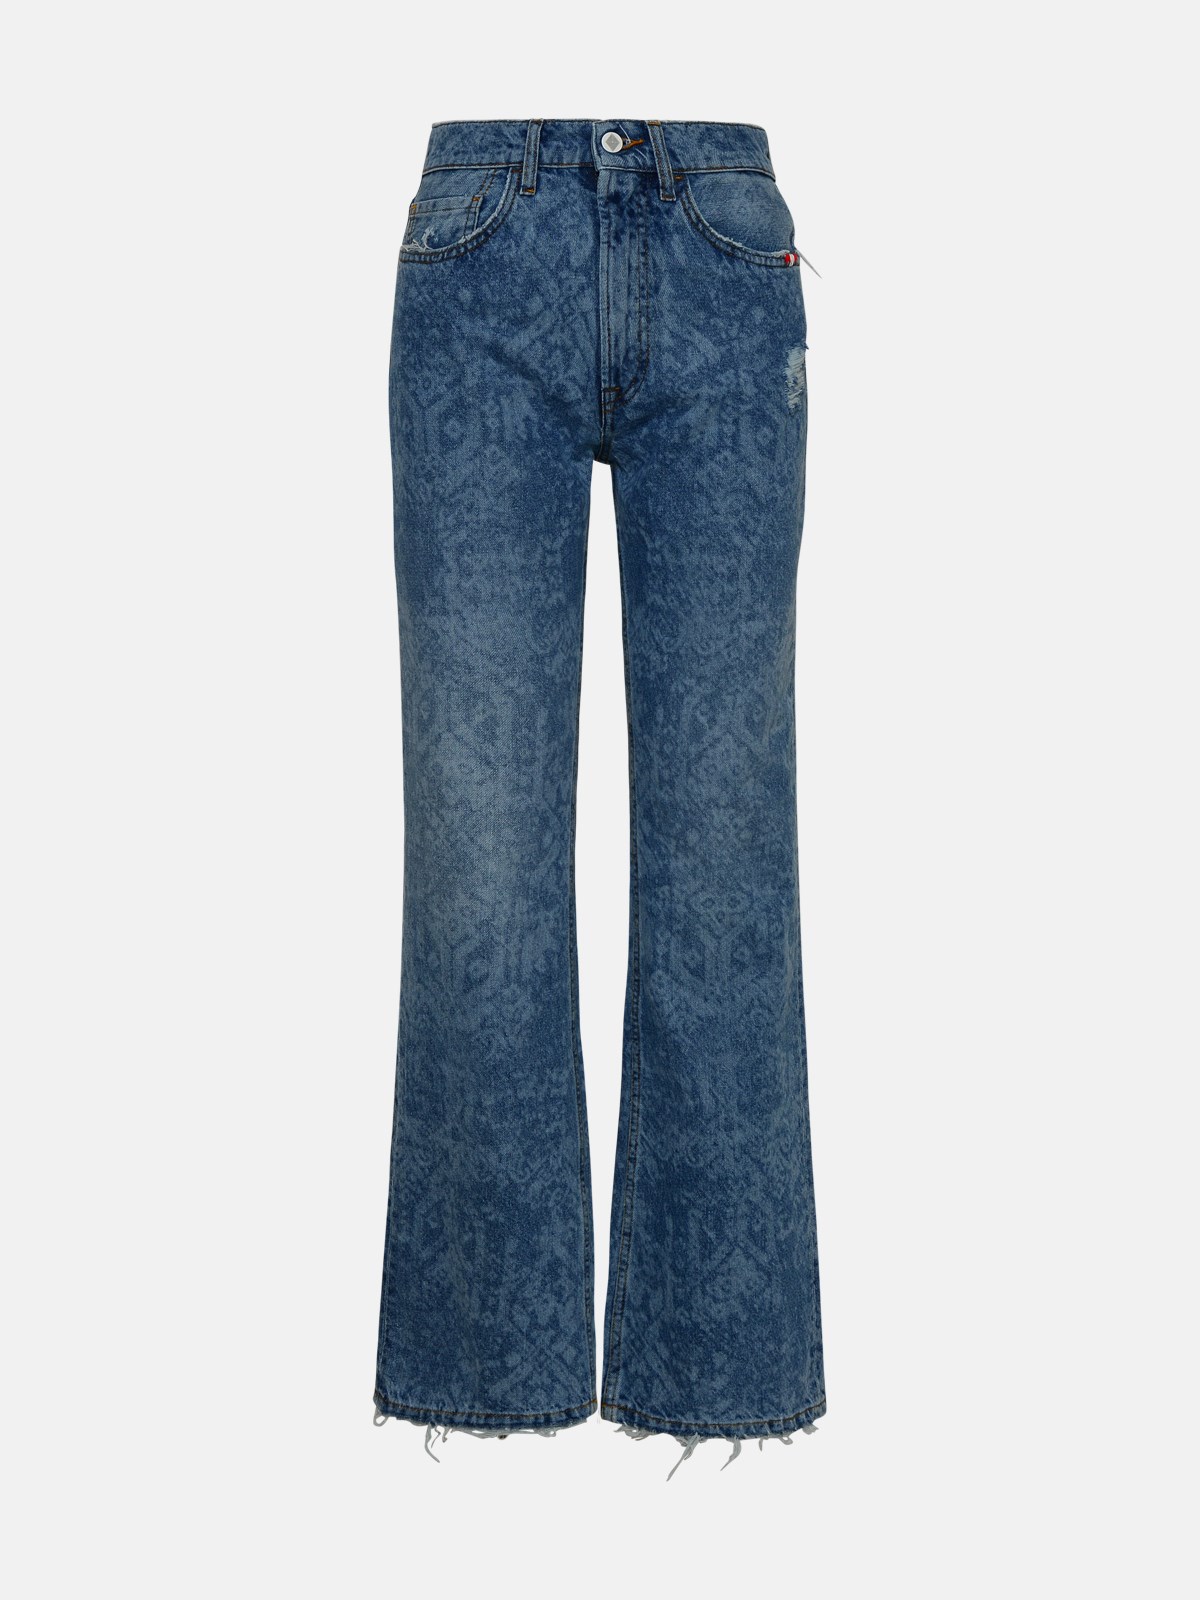 Amish Kendall Blue Cotton Jeans